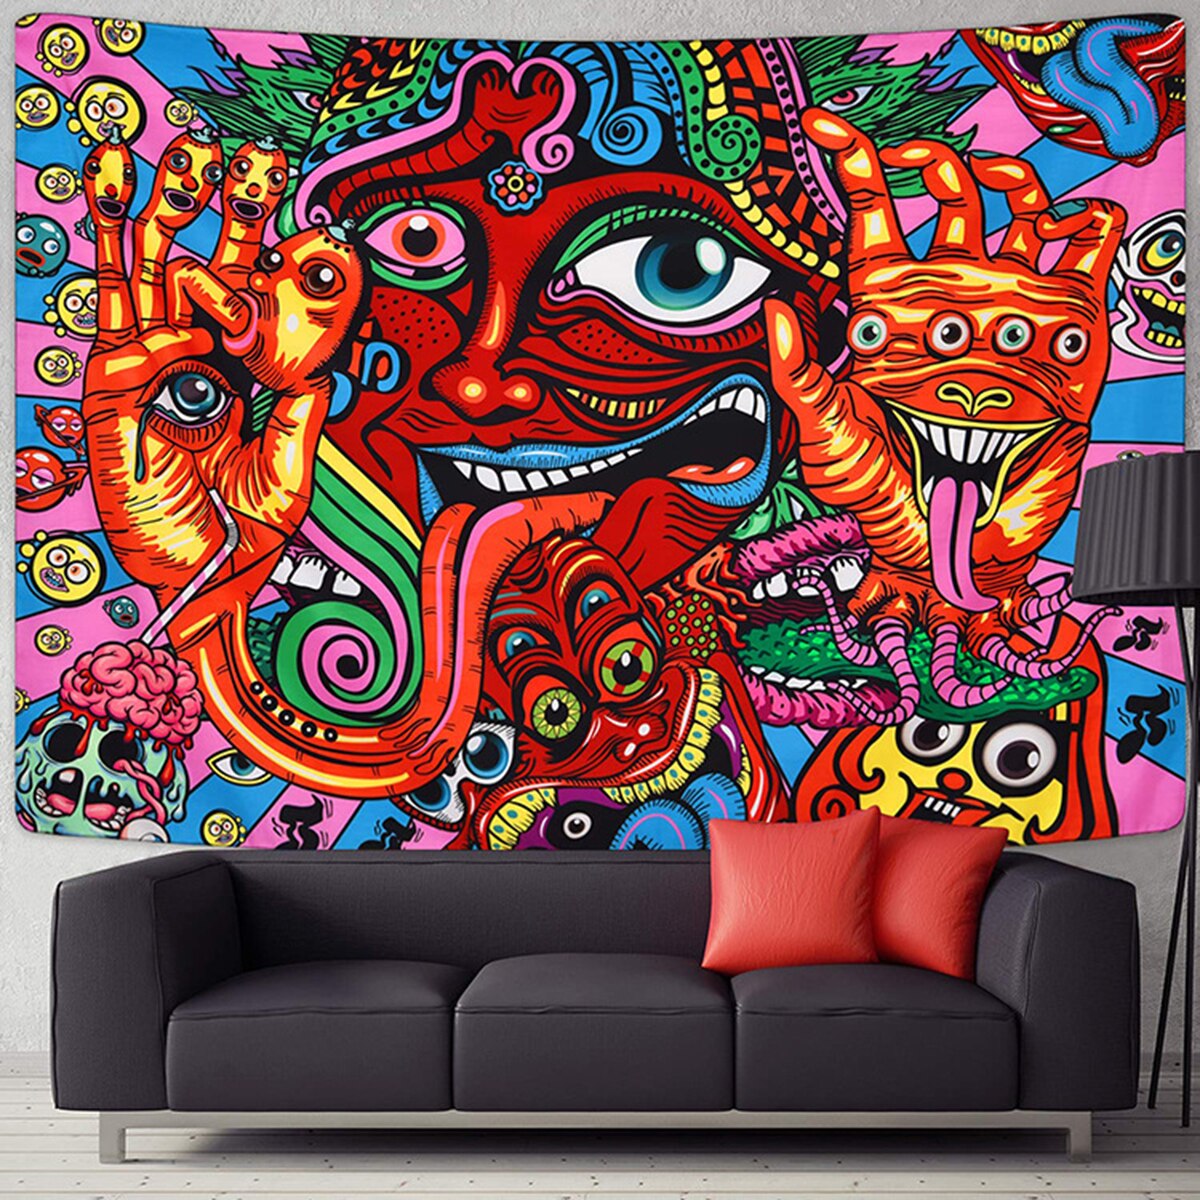 Psychedelic Tapestry Trippy Art Silk Fabric Poster Print Abstract Pictures for Living Room Bed Room Wall Picture Home Decor: 5